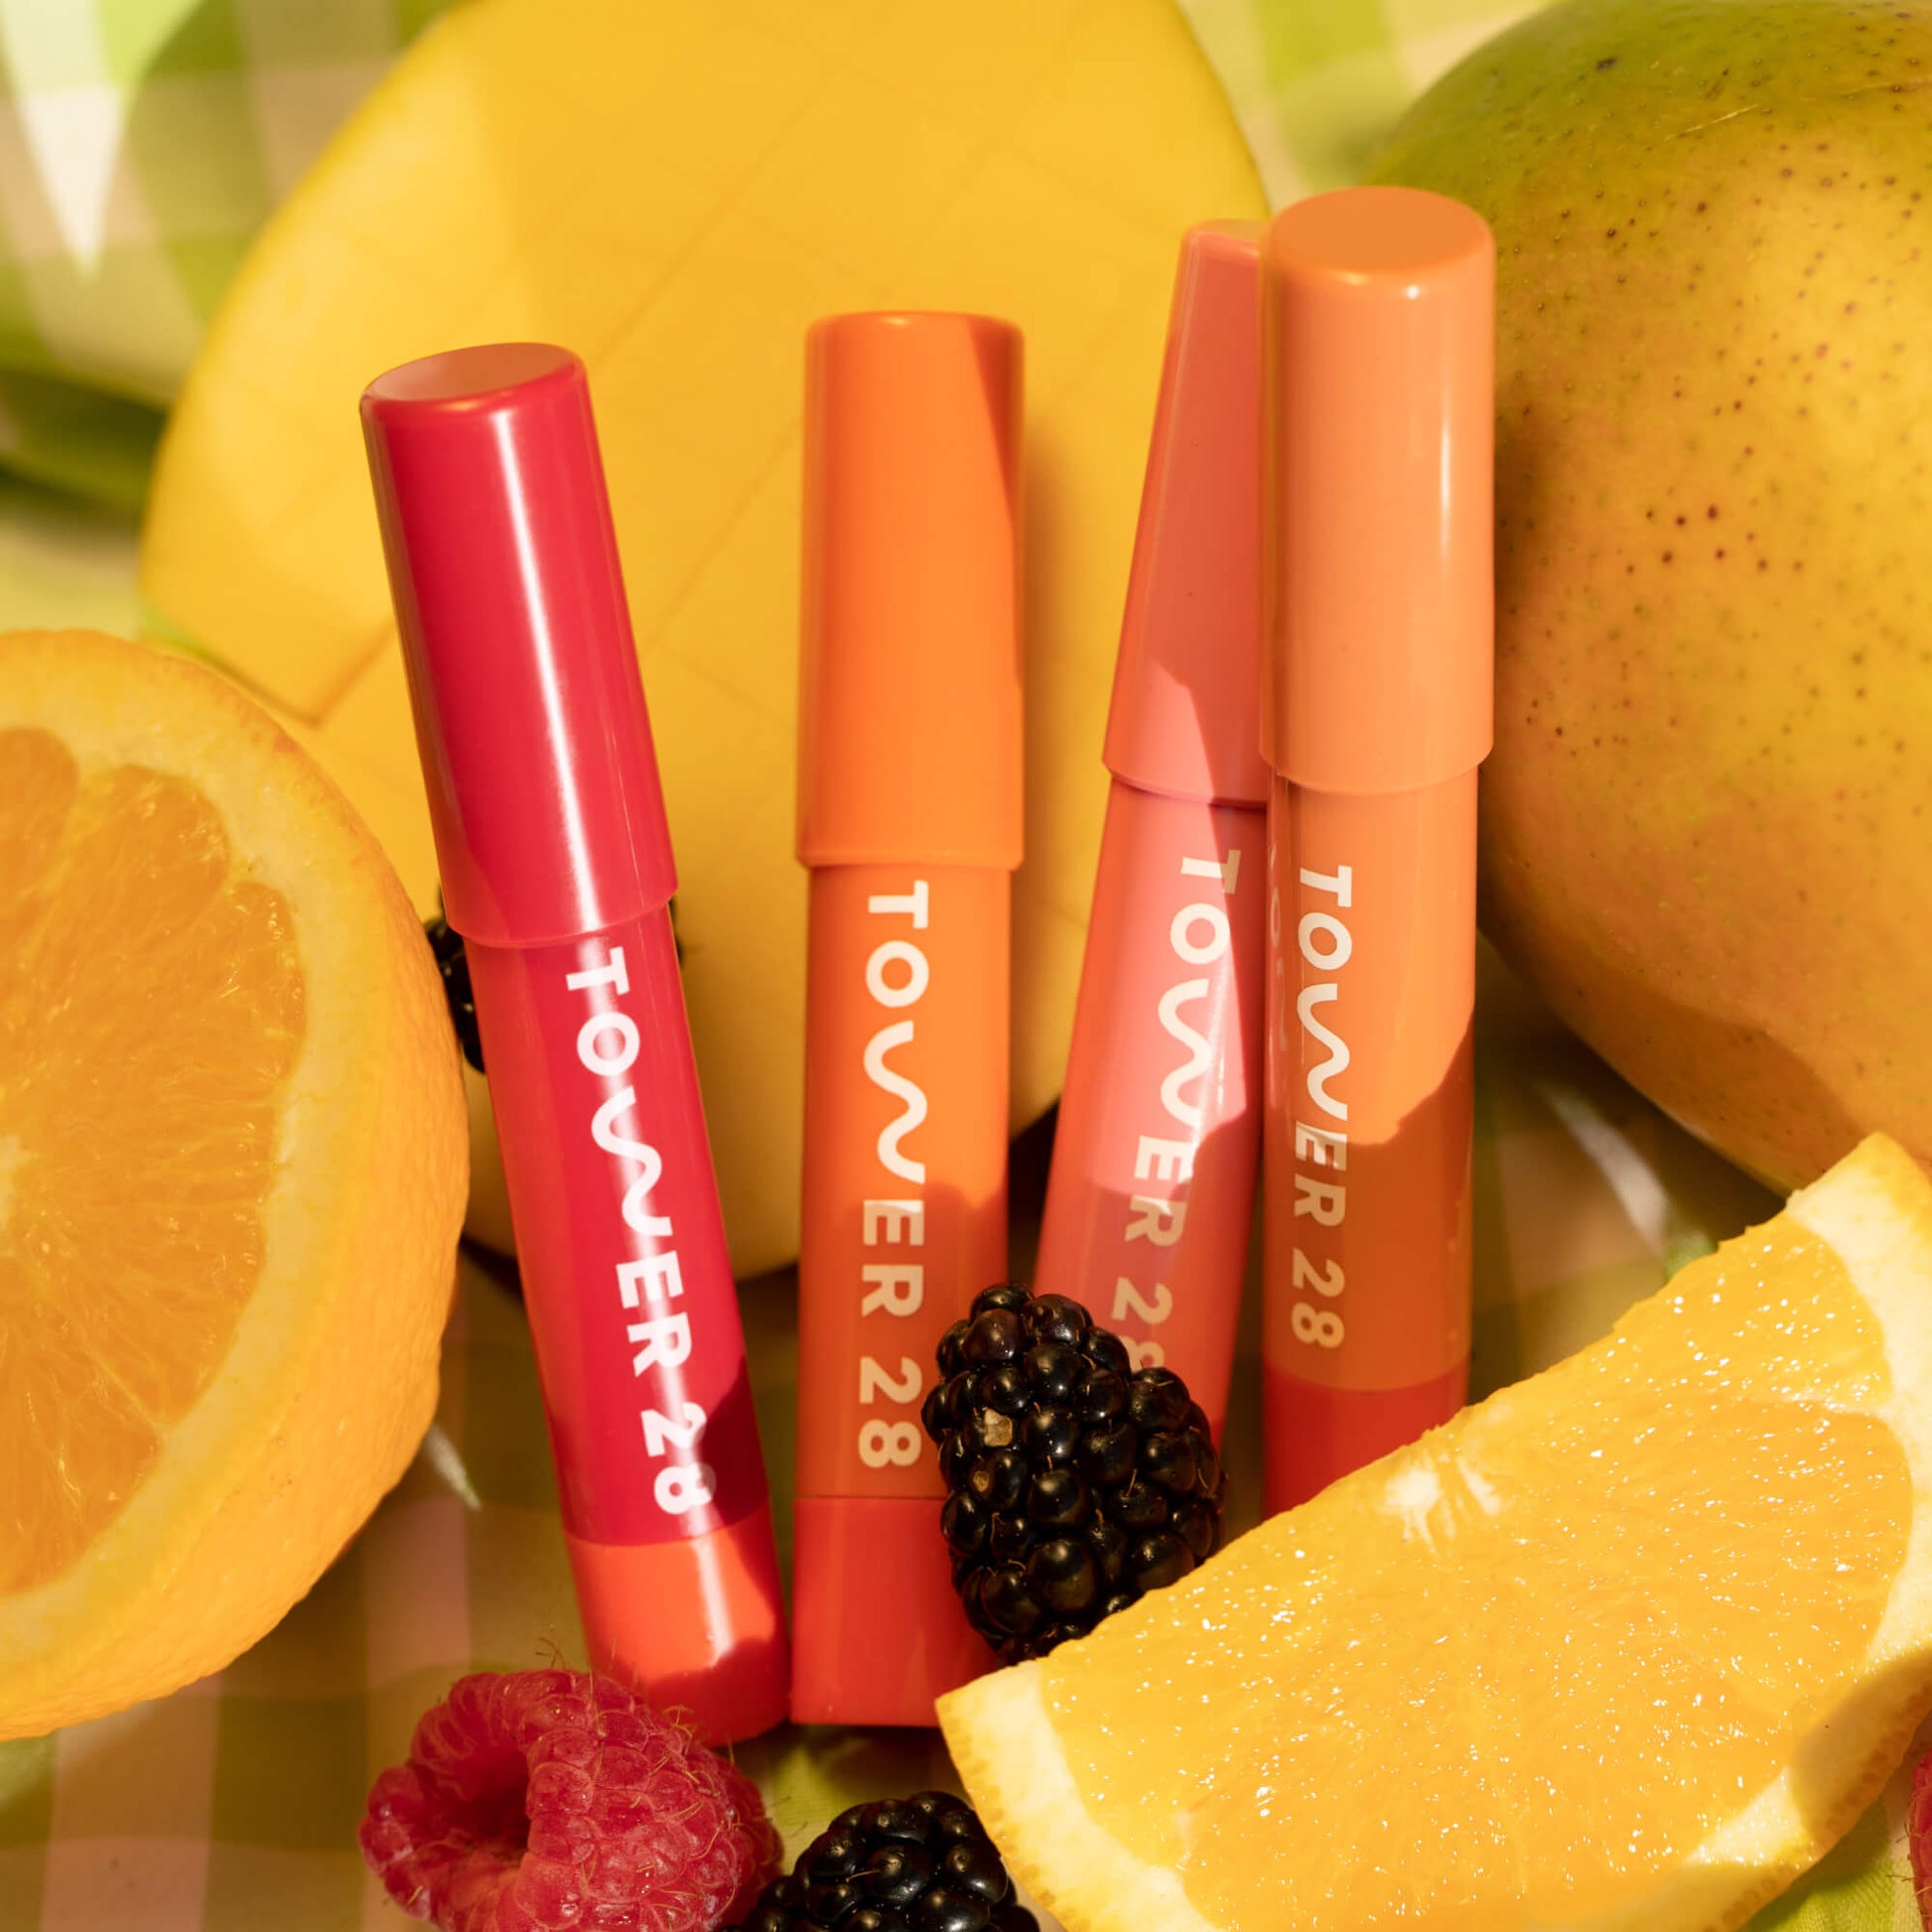 Shared: A close up of all four shades of Tower 28 Beauty's JuiceBalm: Drink, Shake, Mix, and Squeeze).